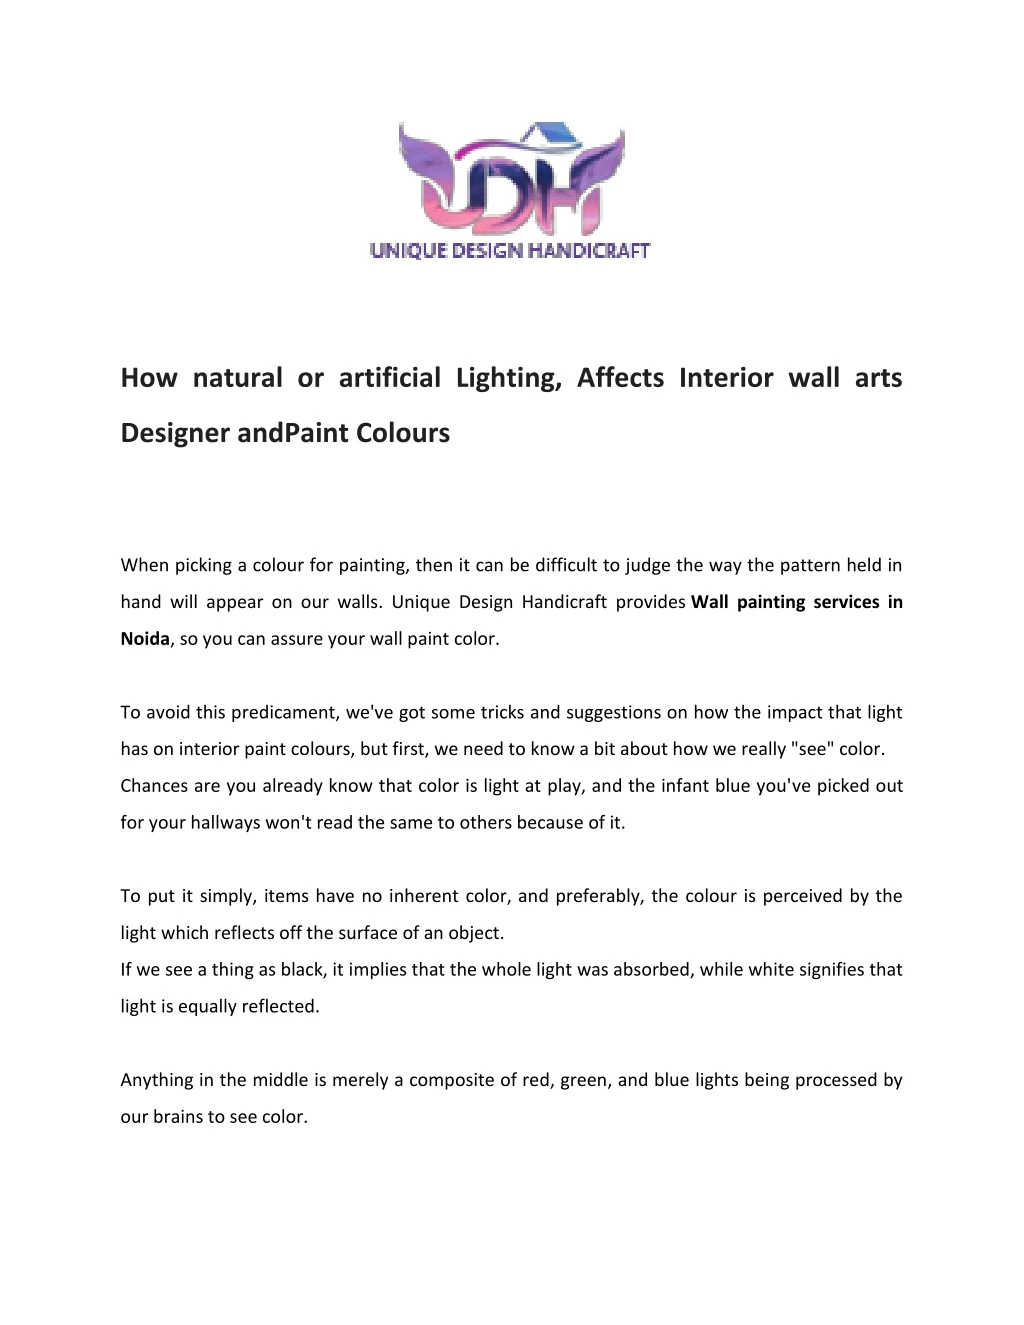 how natural or artificial lighting affects